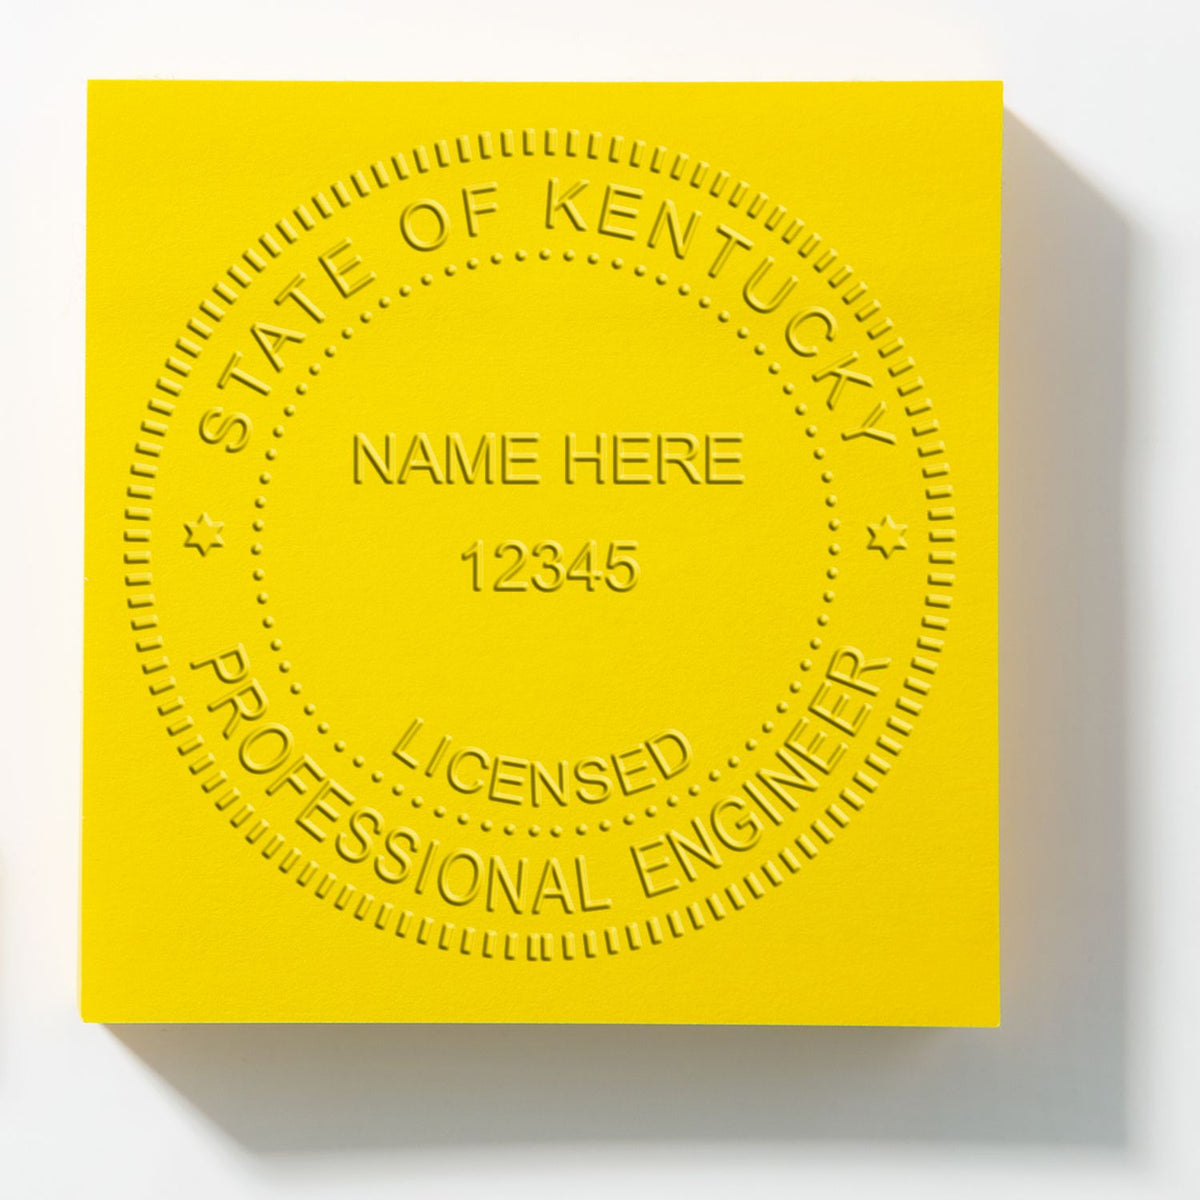 This paper is stamped with a sample imprint of the Kentucky Engineer Desk Seal, signifying its quality and reliability.